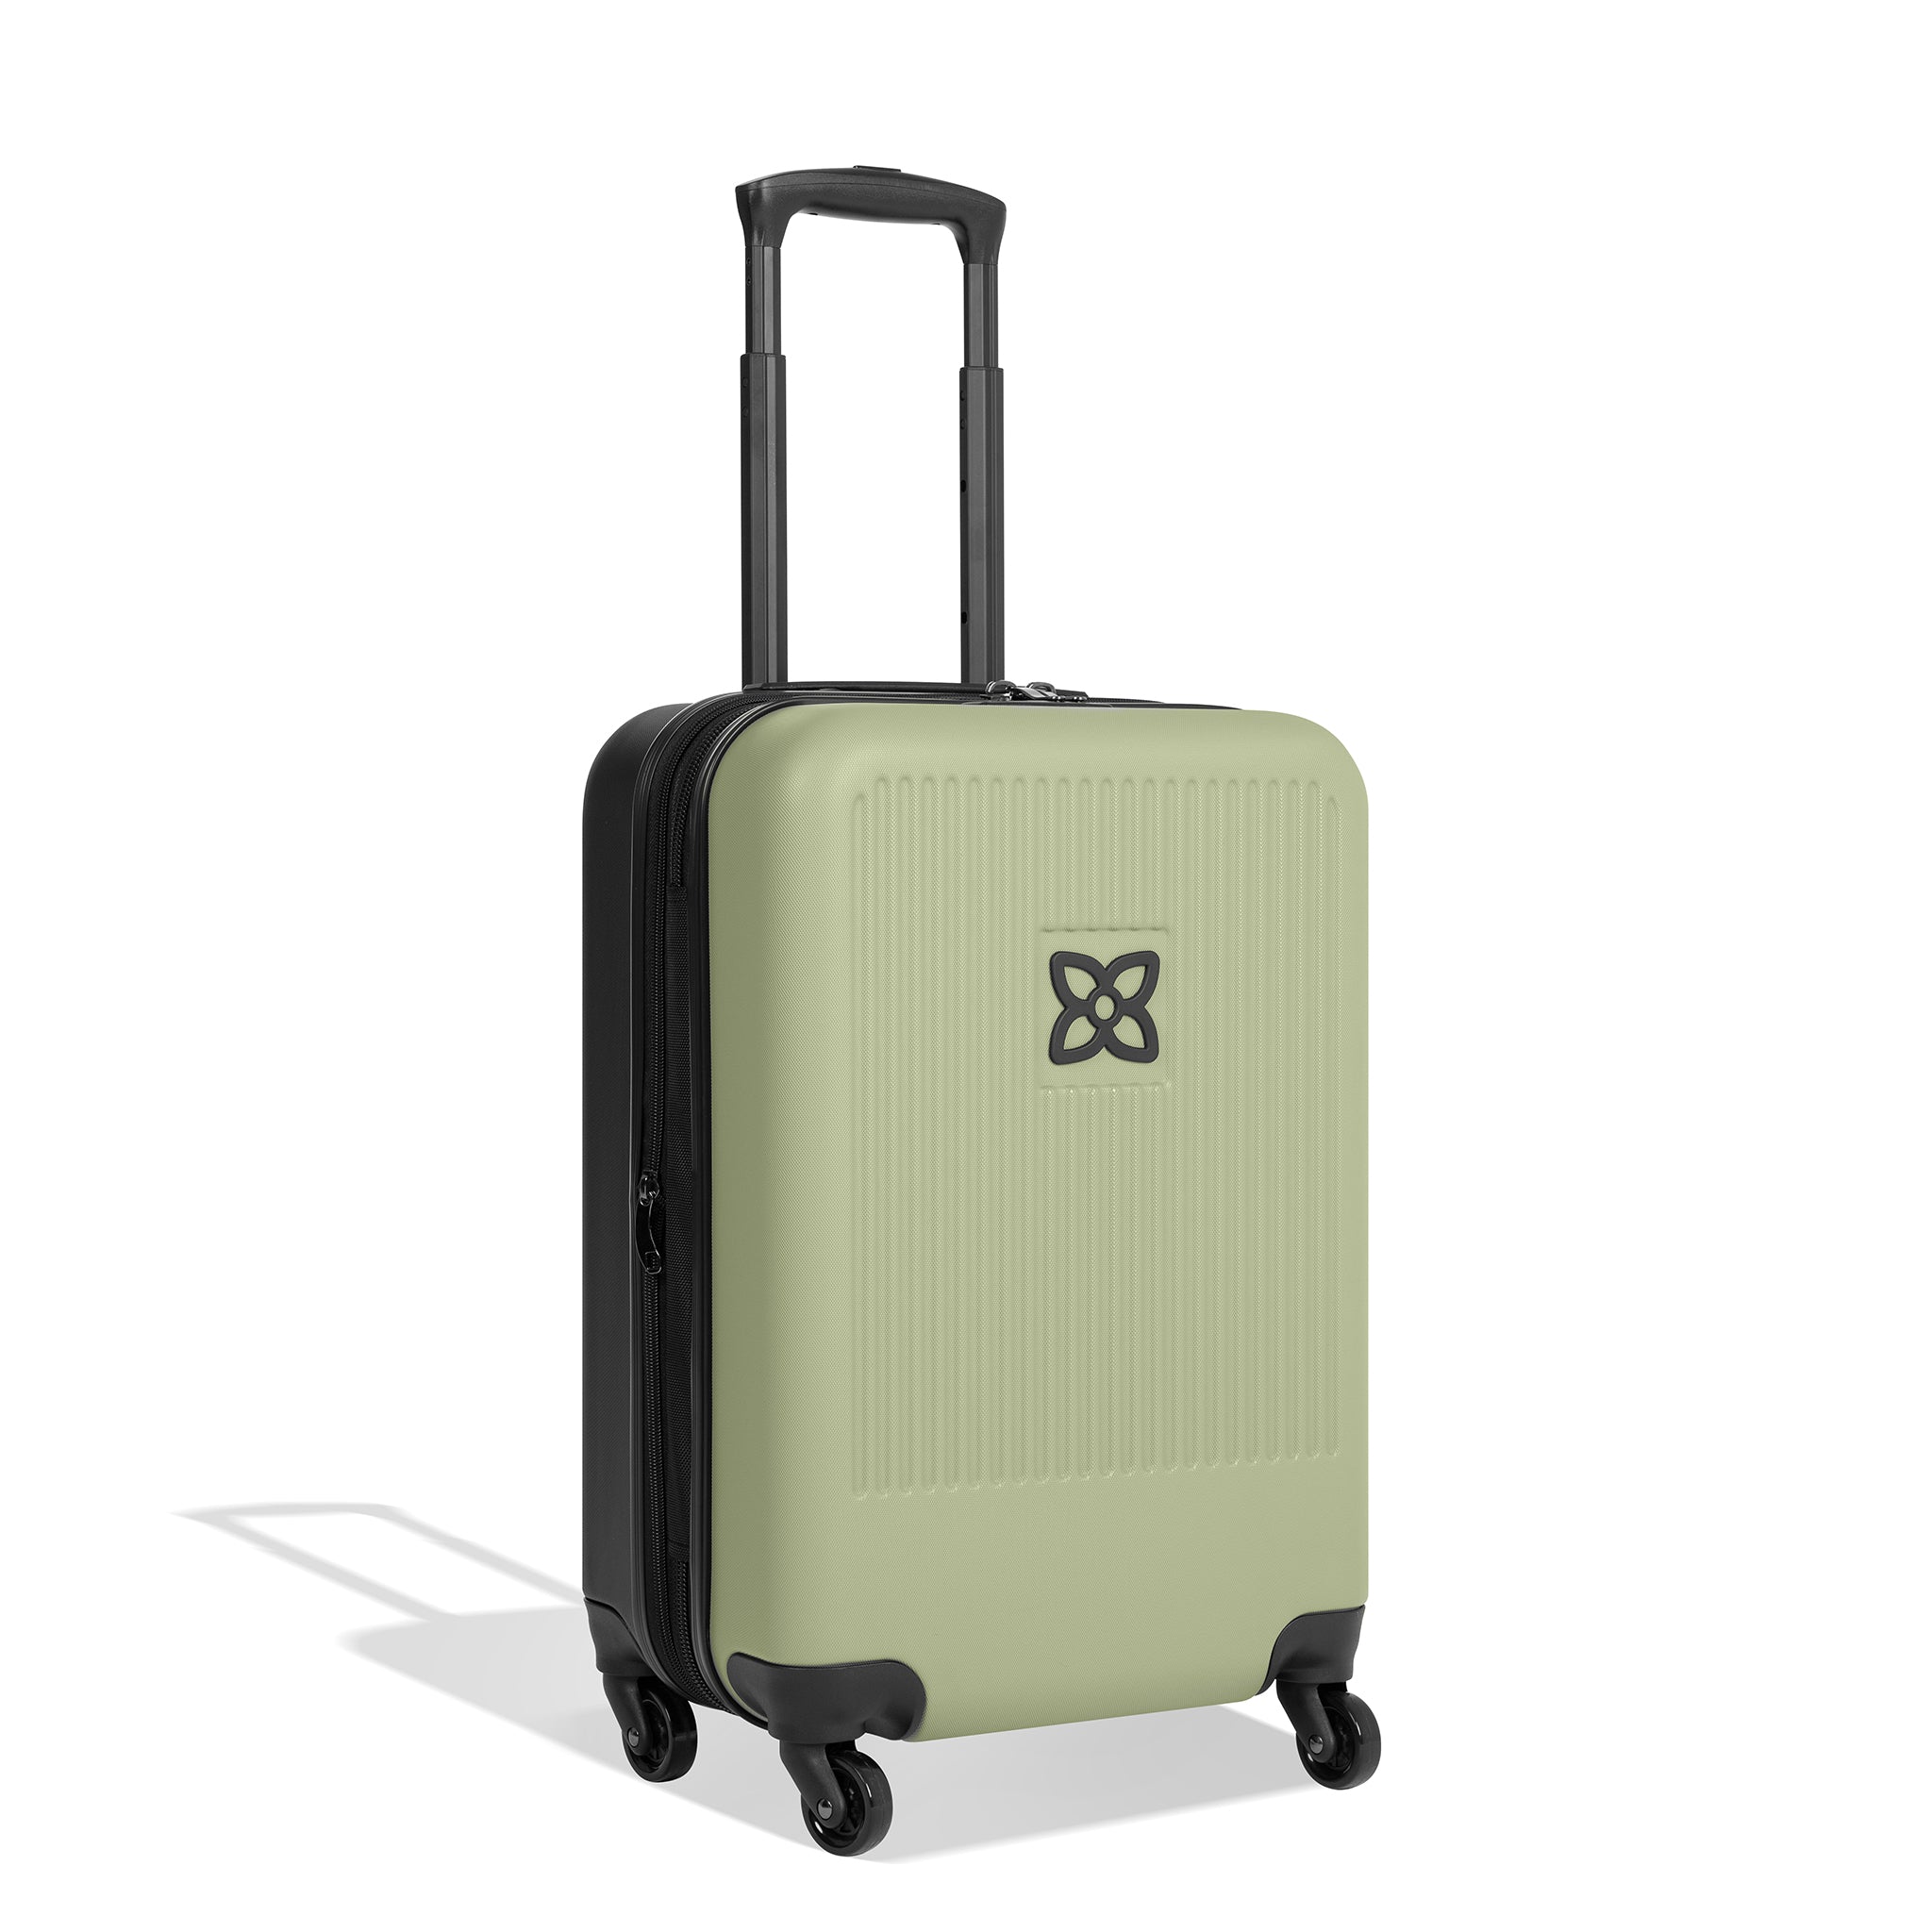 Angled front view of Sherpani hard-shell carry-on luggage, the Meridian in Sage. Meridian features include a retractable luggage handle, uncrushable exterior, TSA-approved locking zippers and four 36-degree spinner wheels. The Sage color is two-toned with the front of the suitcase in sage green and the back in classic black. 